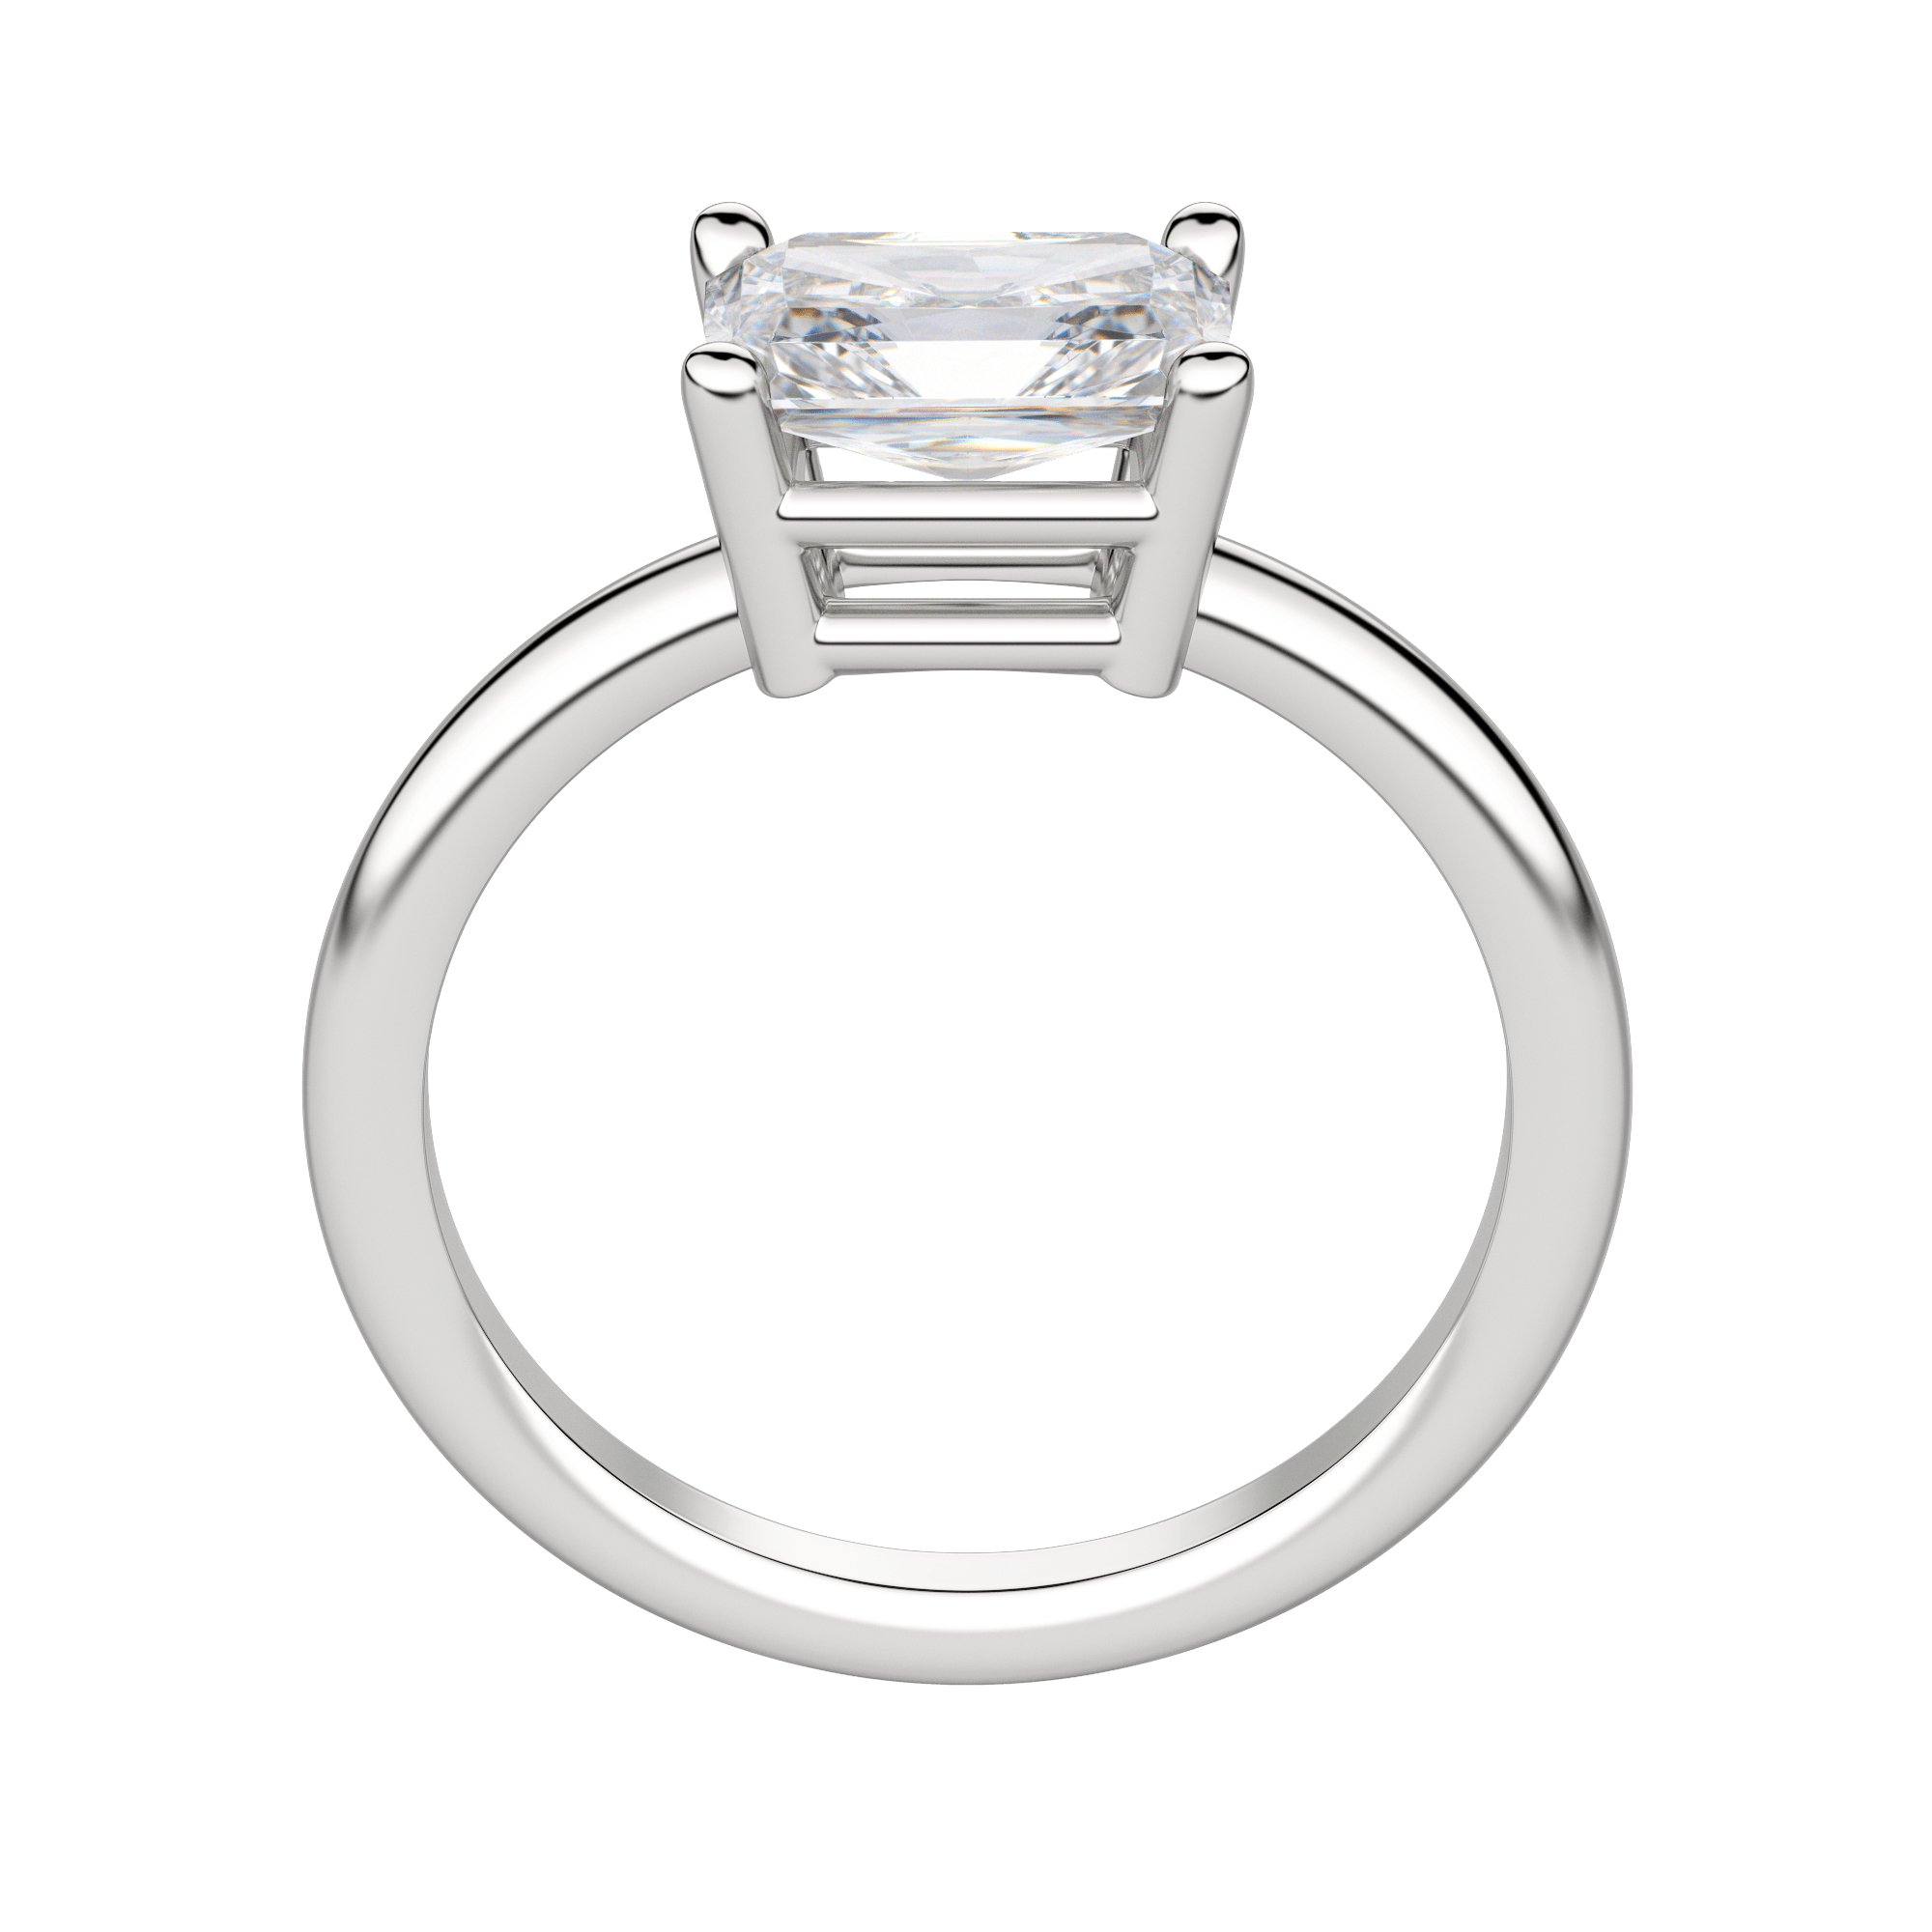 Edgy Basket Classic Radiant Cut Engagement Ring, Platinum, 18K White Gold, Hover, 